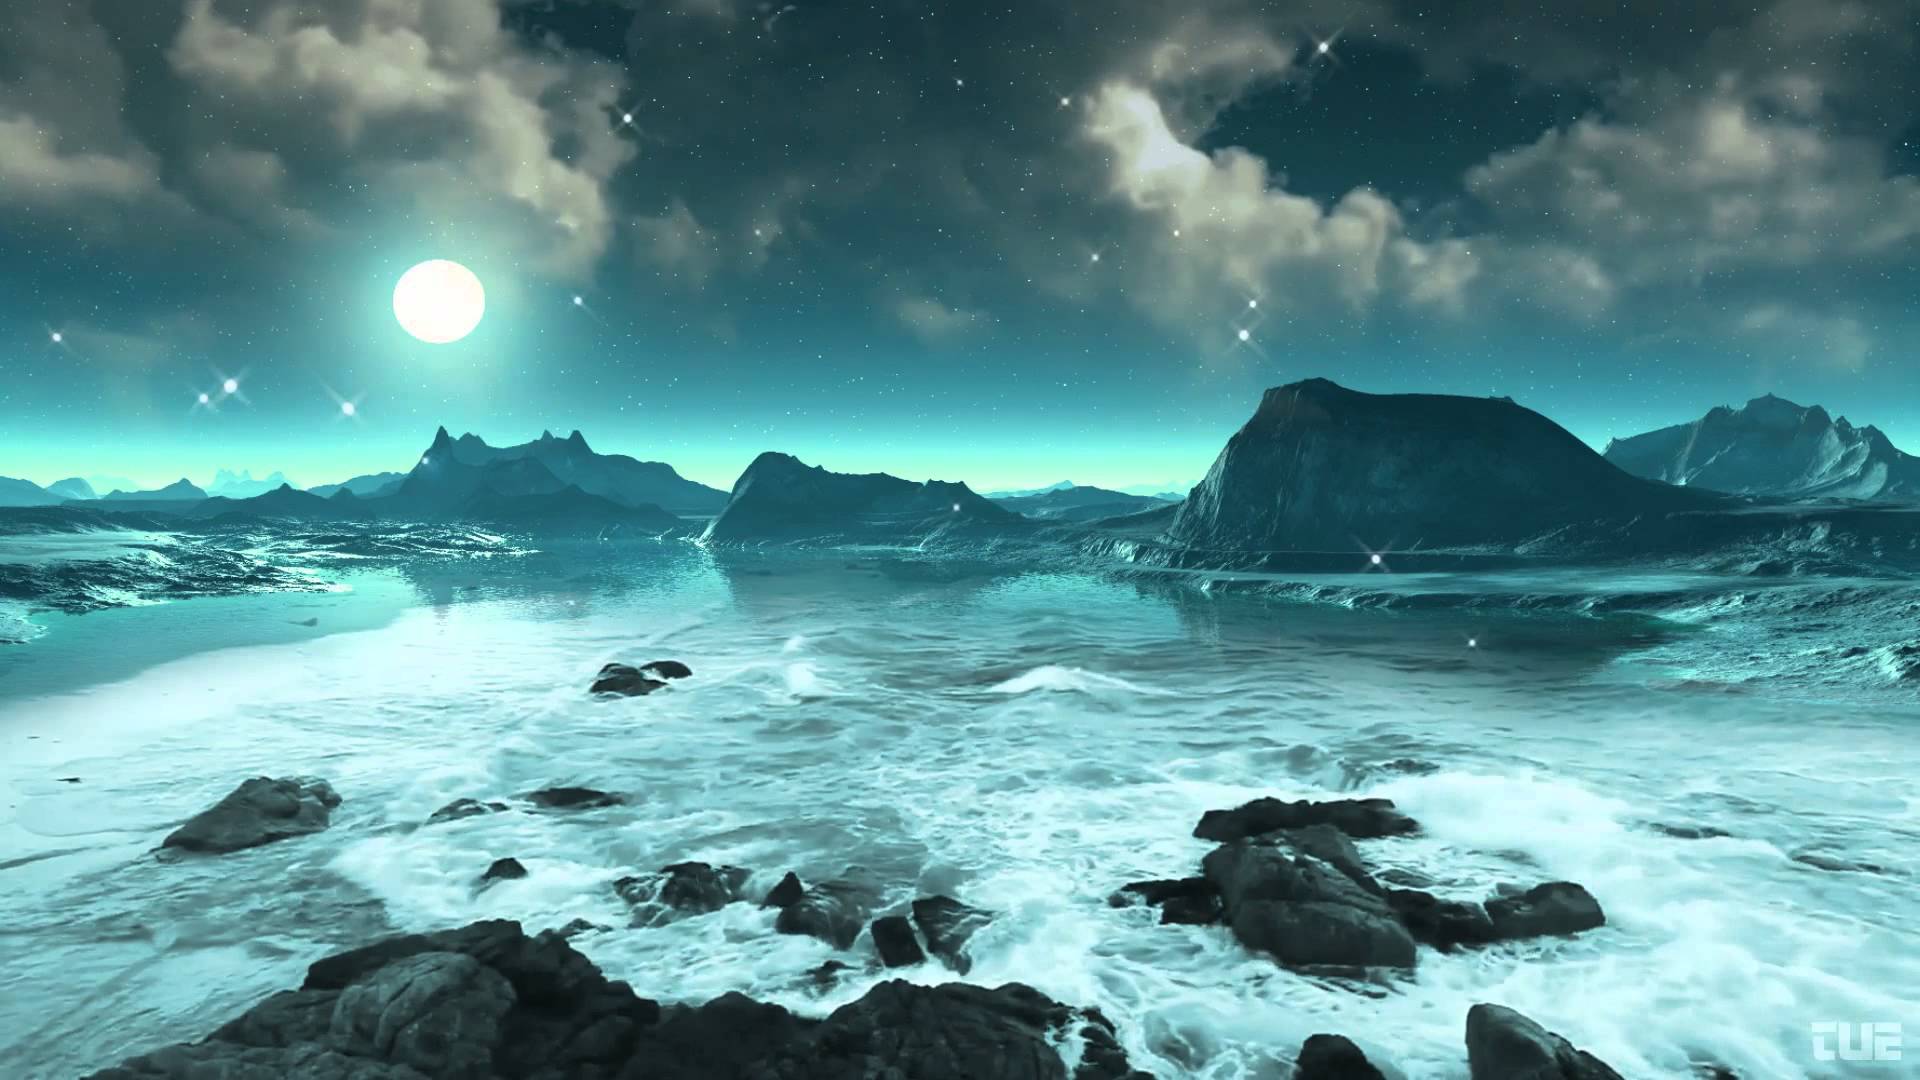 Moonlight, Stars And Ocean Waves 2 Background HD 1080p